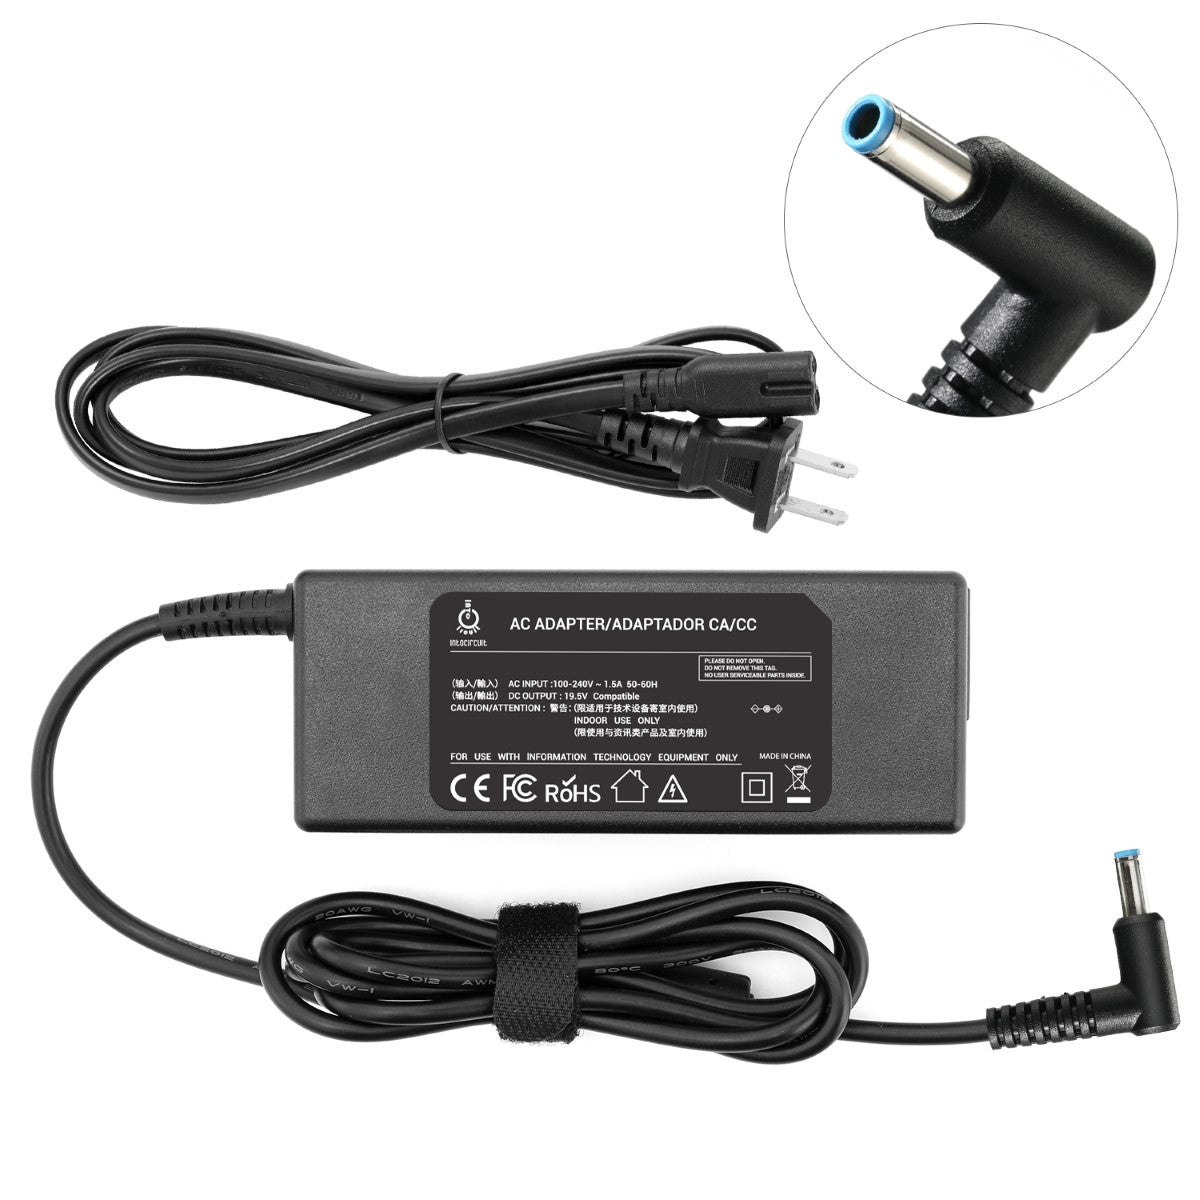 Charger for HP Envy 15-u110dx X360 Convertible Laptop